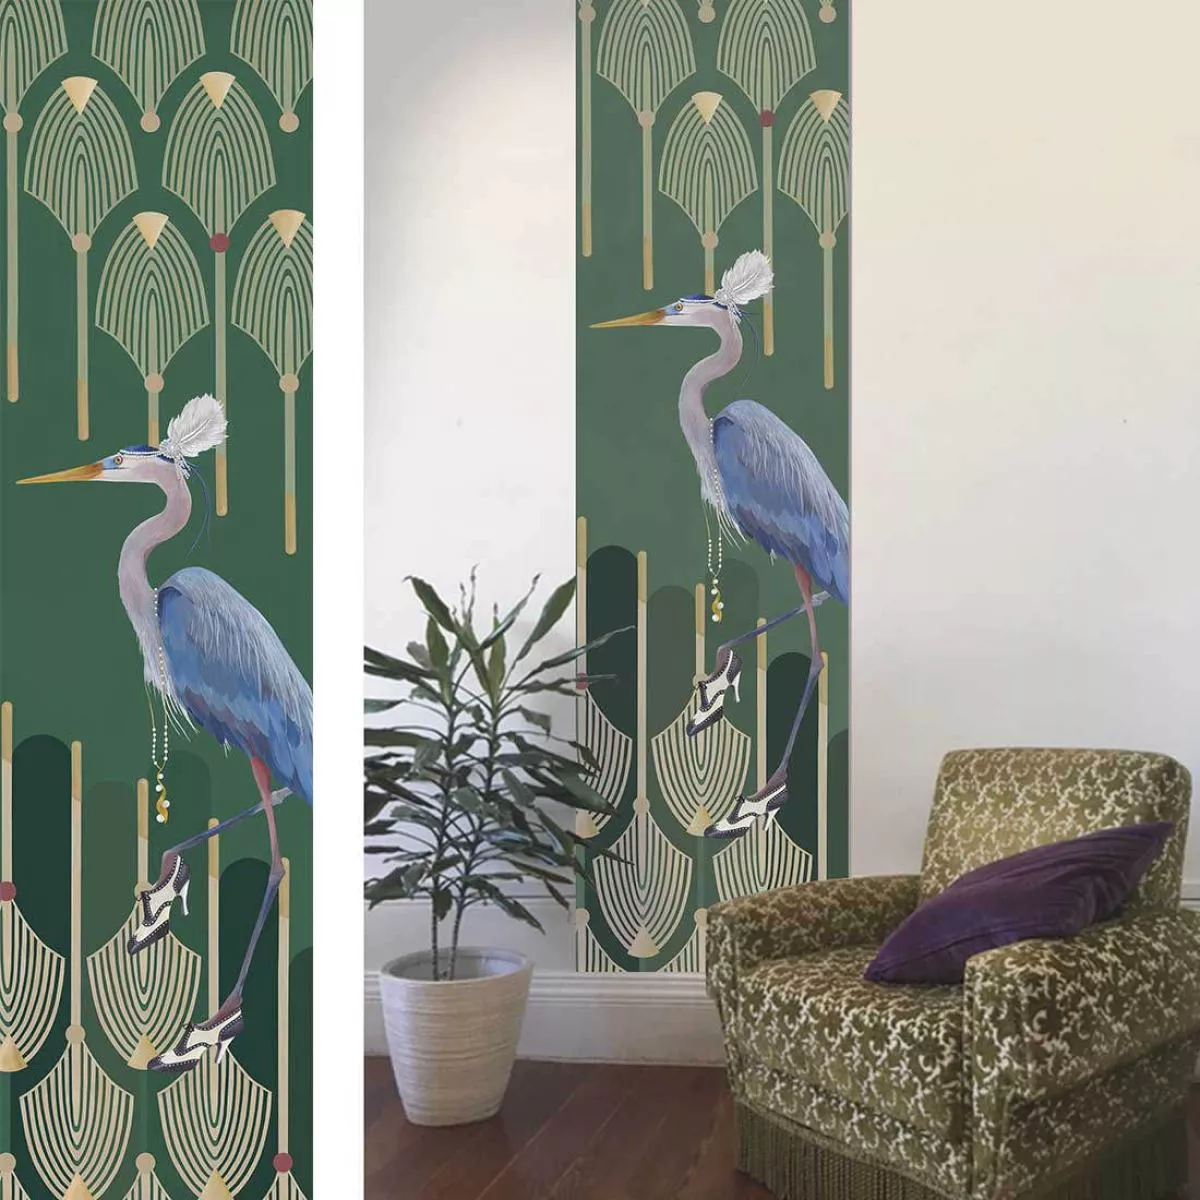 Wallpaper with heron image, green background